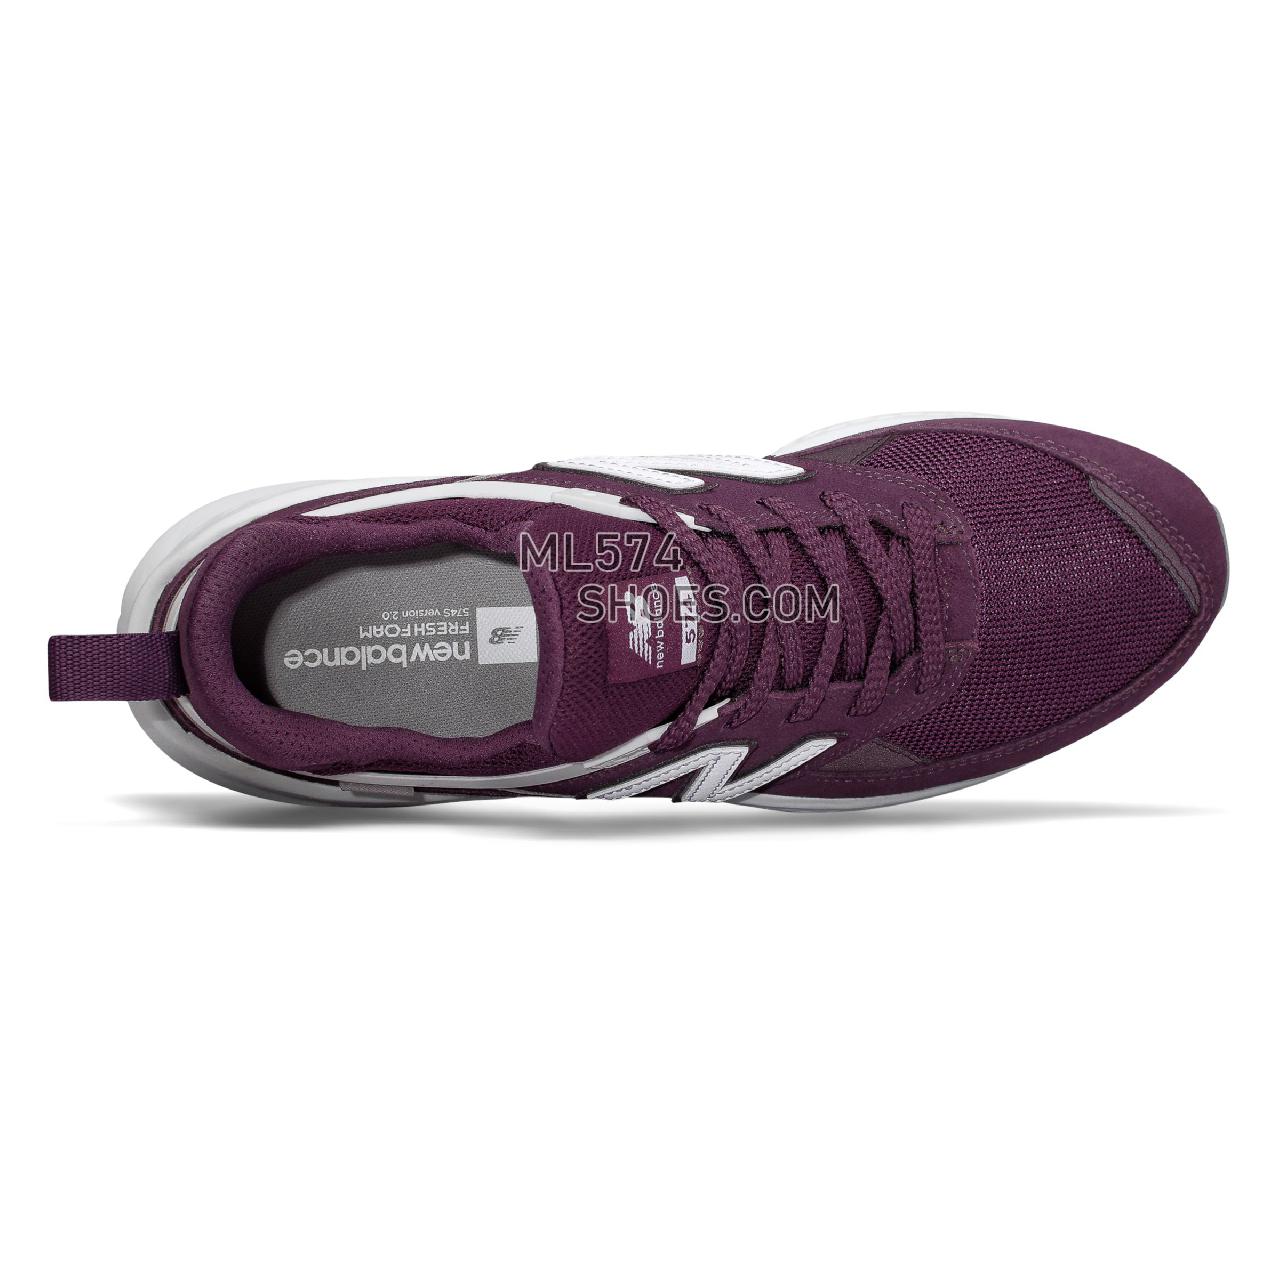 New Balance 574 Sport - Men's Sport Style Sneakers - Dark Currant with White - MS574NSC